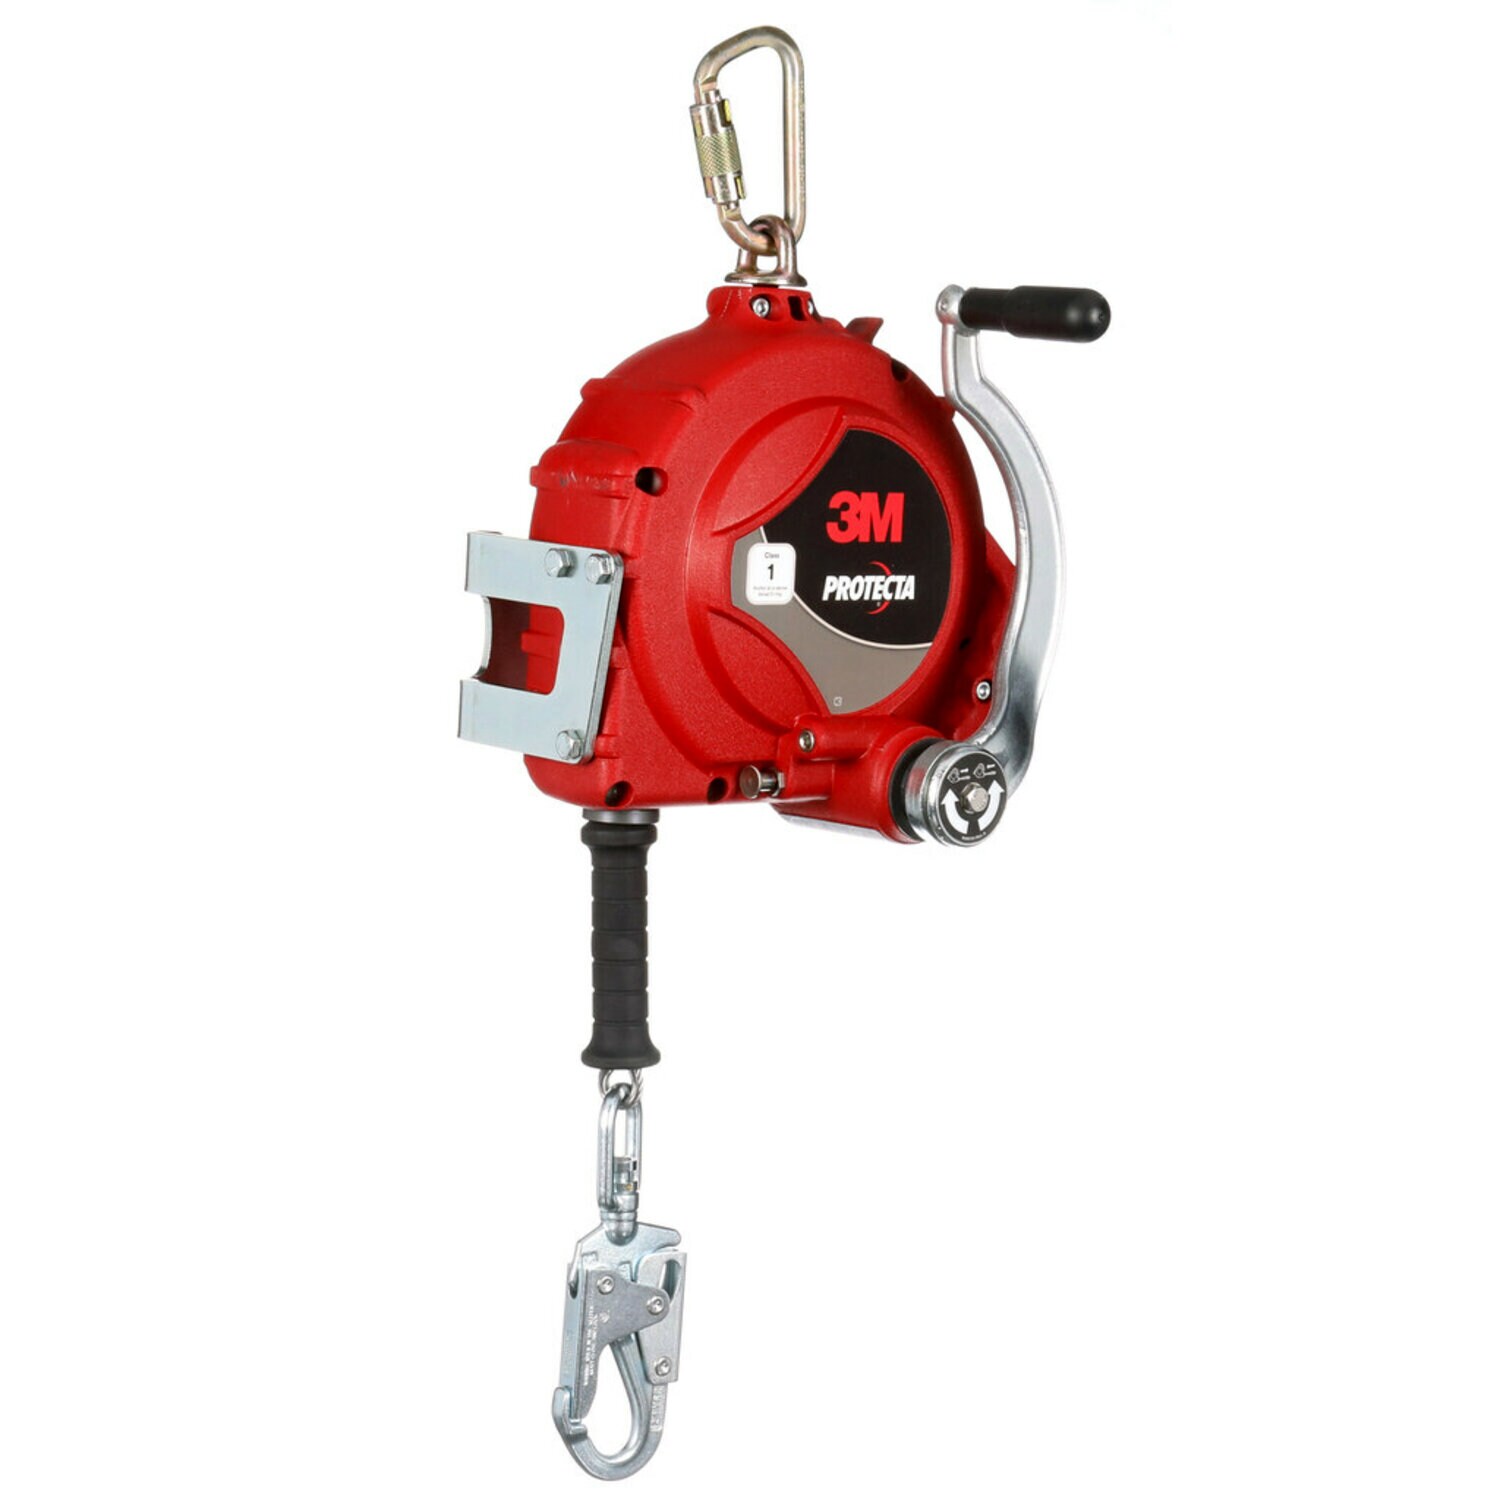 7100318446 - 3M Protecta 3-Way Retrieval Self-Retracting Lifeline with Bracket 3590052, Galvanized Cable, Steel Snap Hook, 50ft, Class 1, ANSI